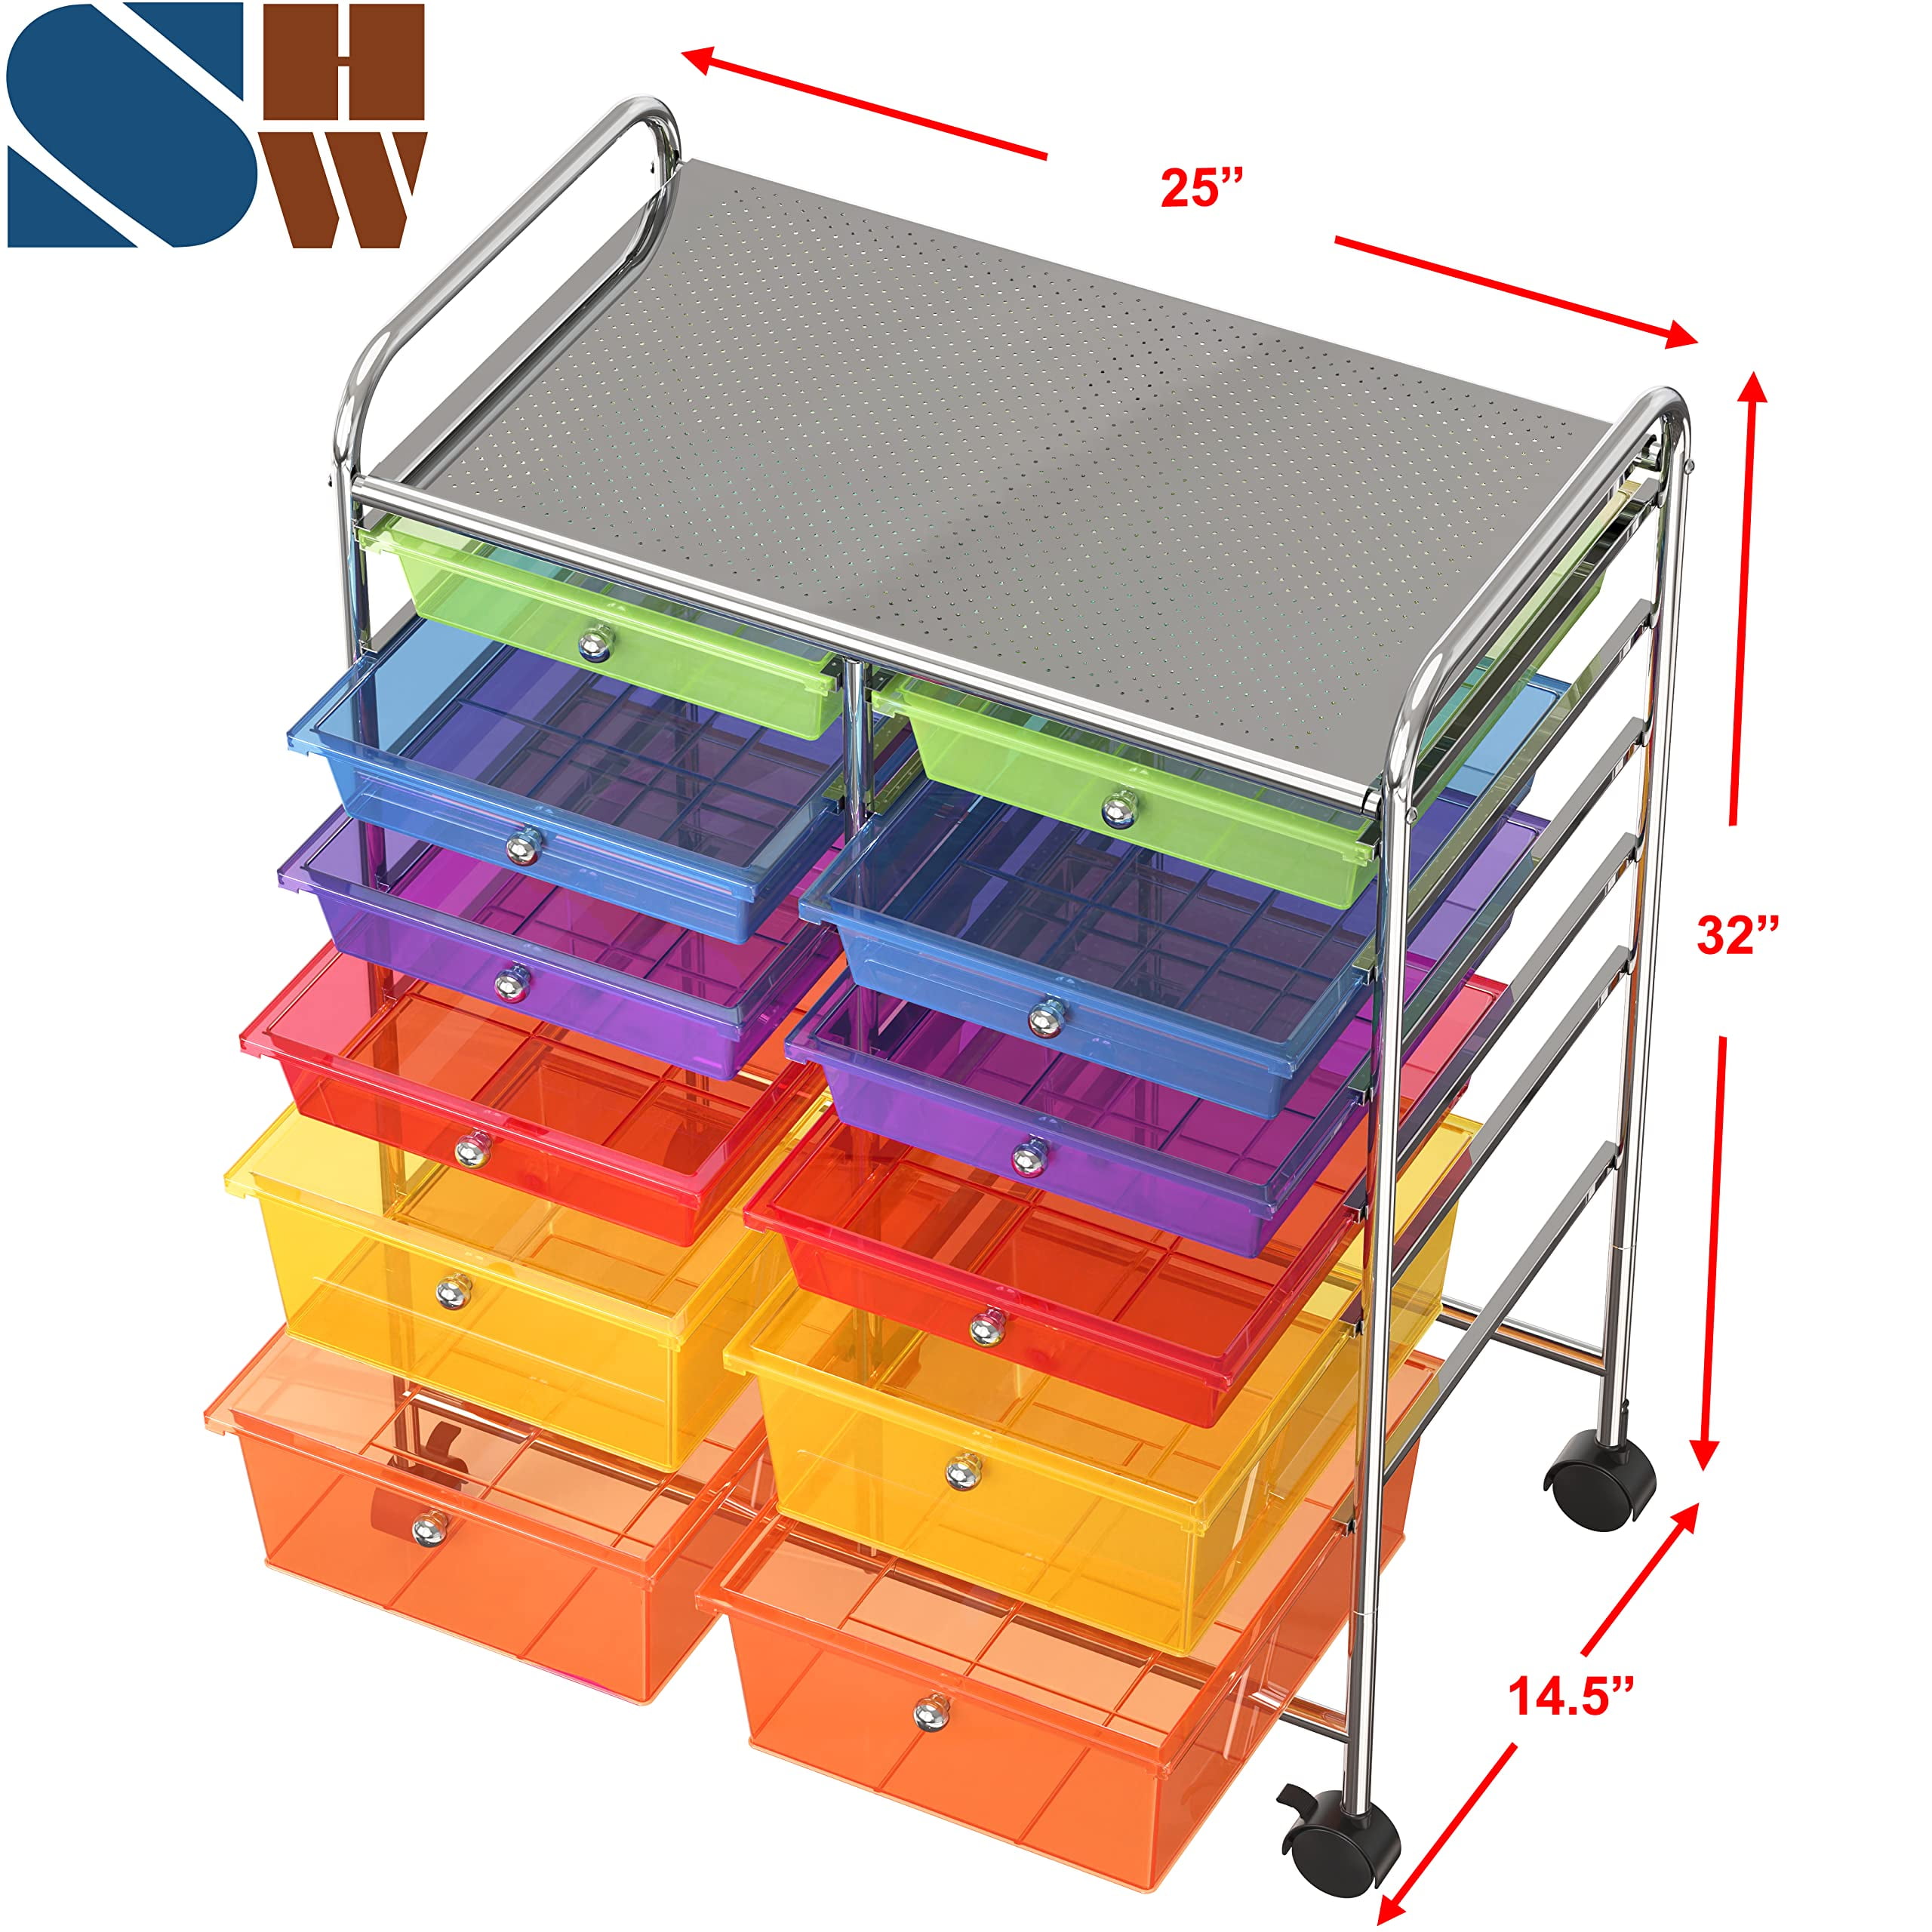  SILKYDRY 10 Drawer Rolling Storage Cart, Organization Cart with  Drawers for Craft Makeup Paper Tool Art Supply, Versatile Utility Cart on  Wheels for Home Office Classroom School (Multicolor) : Office Products